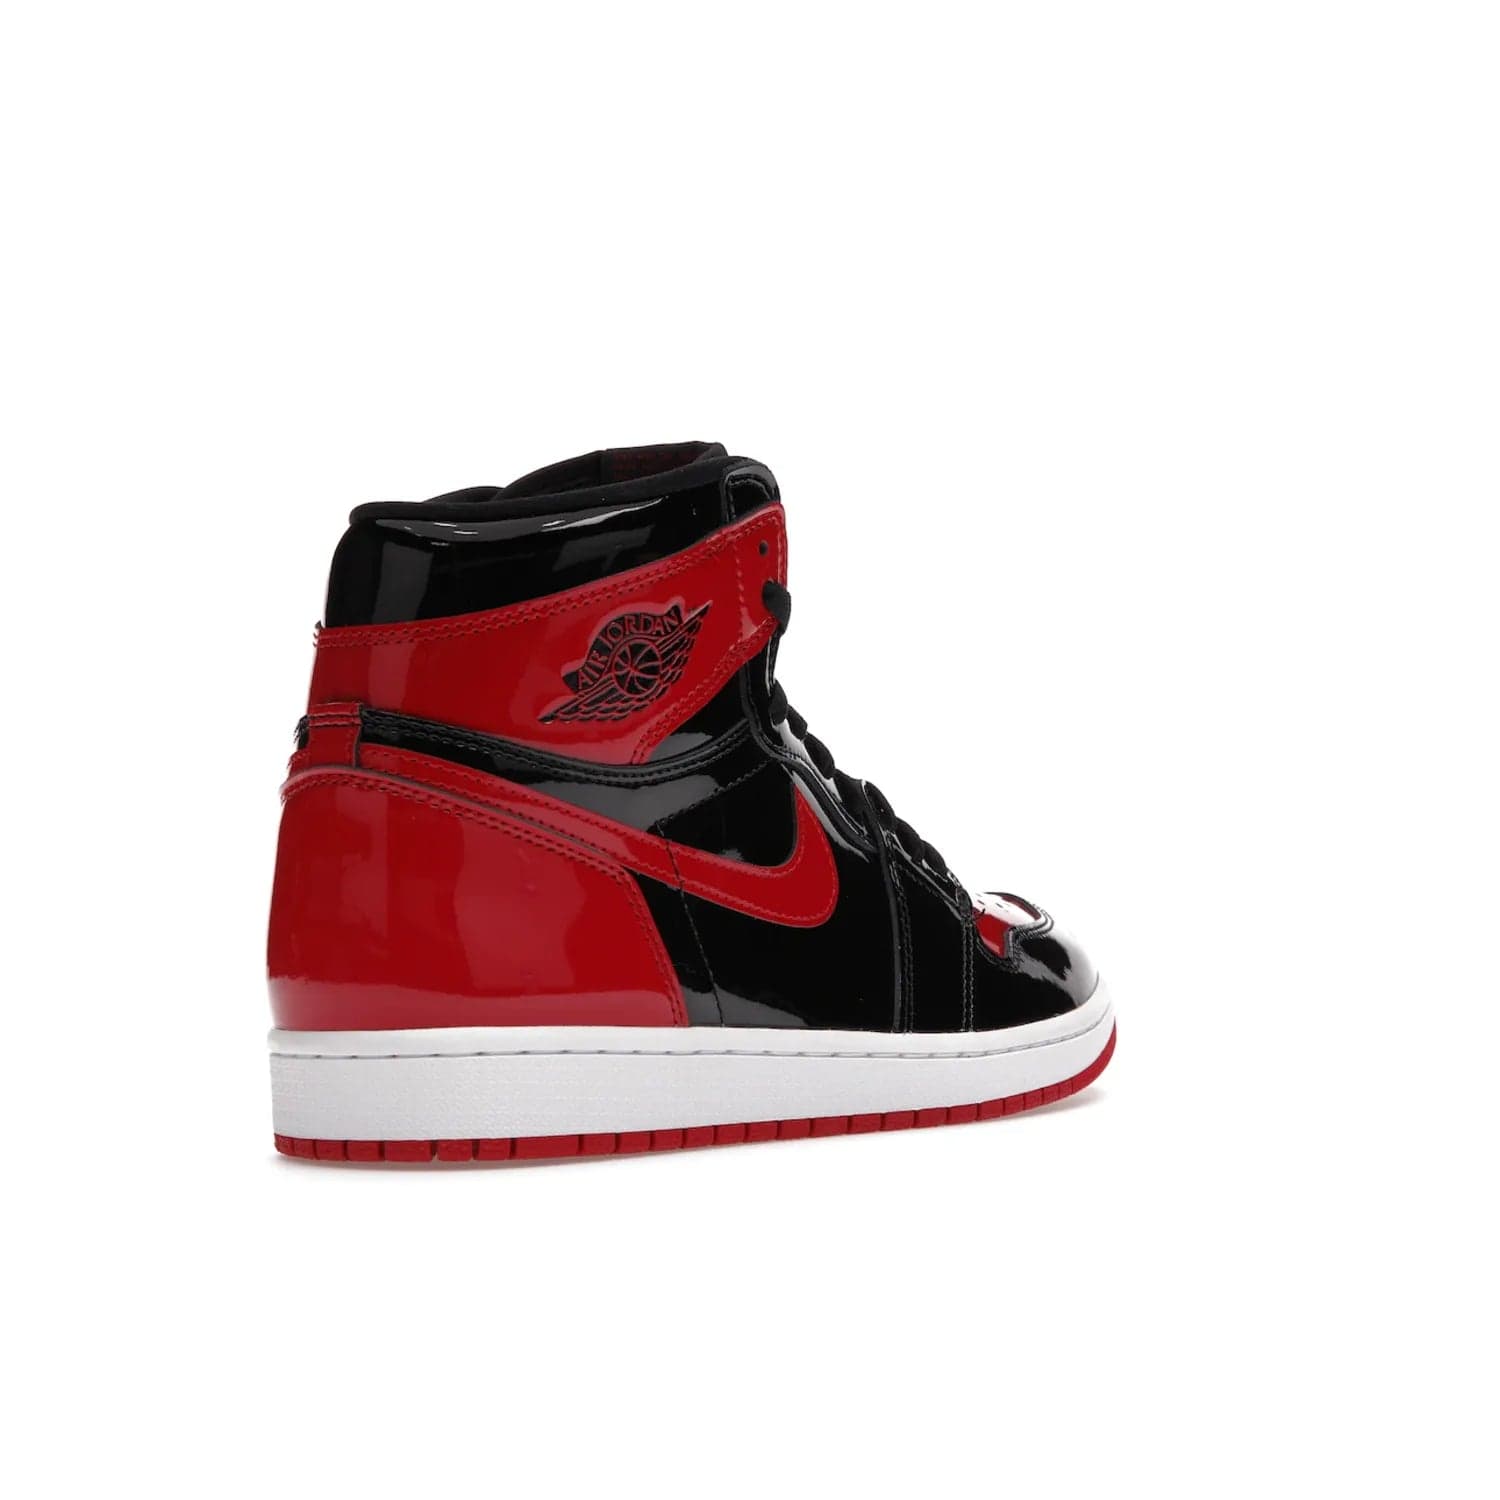 Jordan 1 Retro High OG Patent Bred - Image 32 - Only at www.BallersClubKickz.com - Introducing Air Jordan 1 Retro High OG Patent Bred - sleek patent leather upper, signature weaved Nike Air tongue and classic Wings logo on collar. Red and white sole complete signature look. Releasing December 2021 - perfect retro edition for holidays.